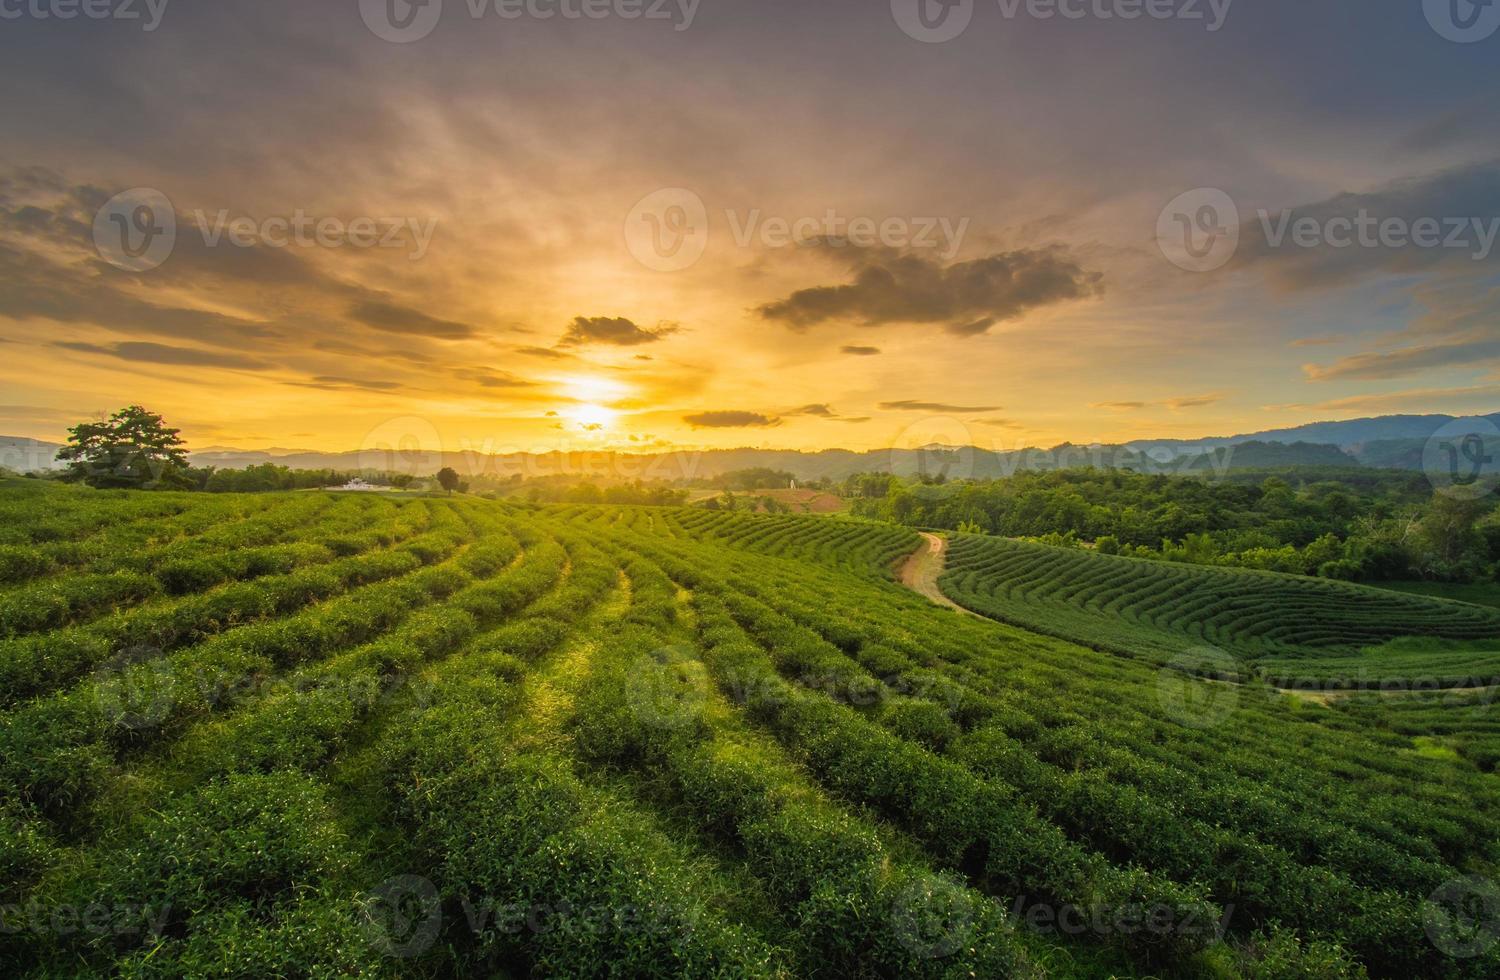 Chui Fong Tea Plantation This is a popular tourist attraction in Chiang Rai. Beautiful sunset photo